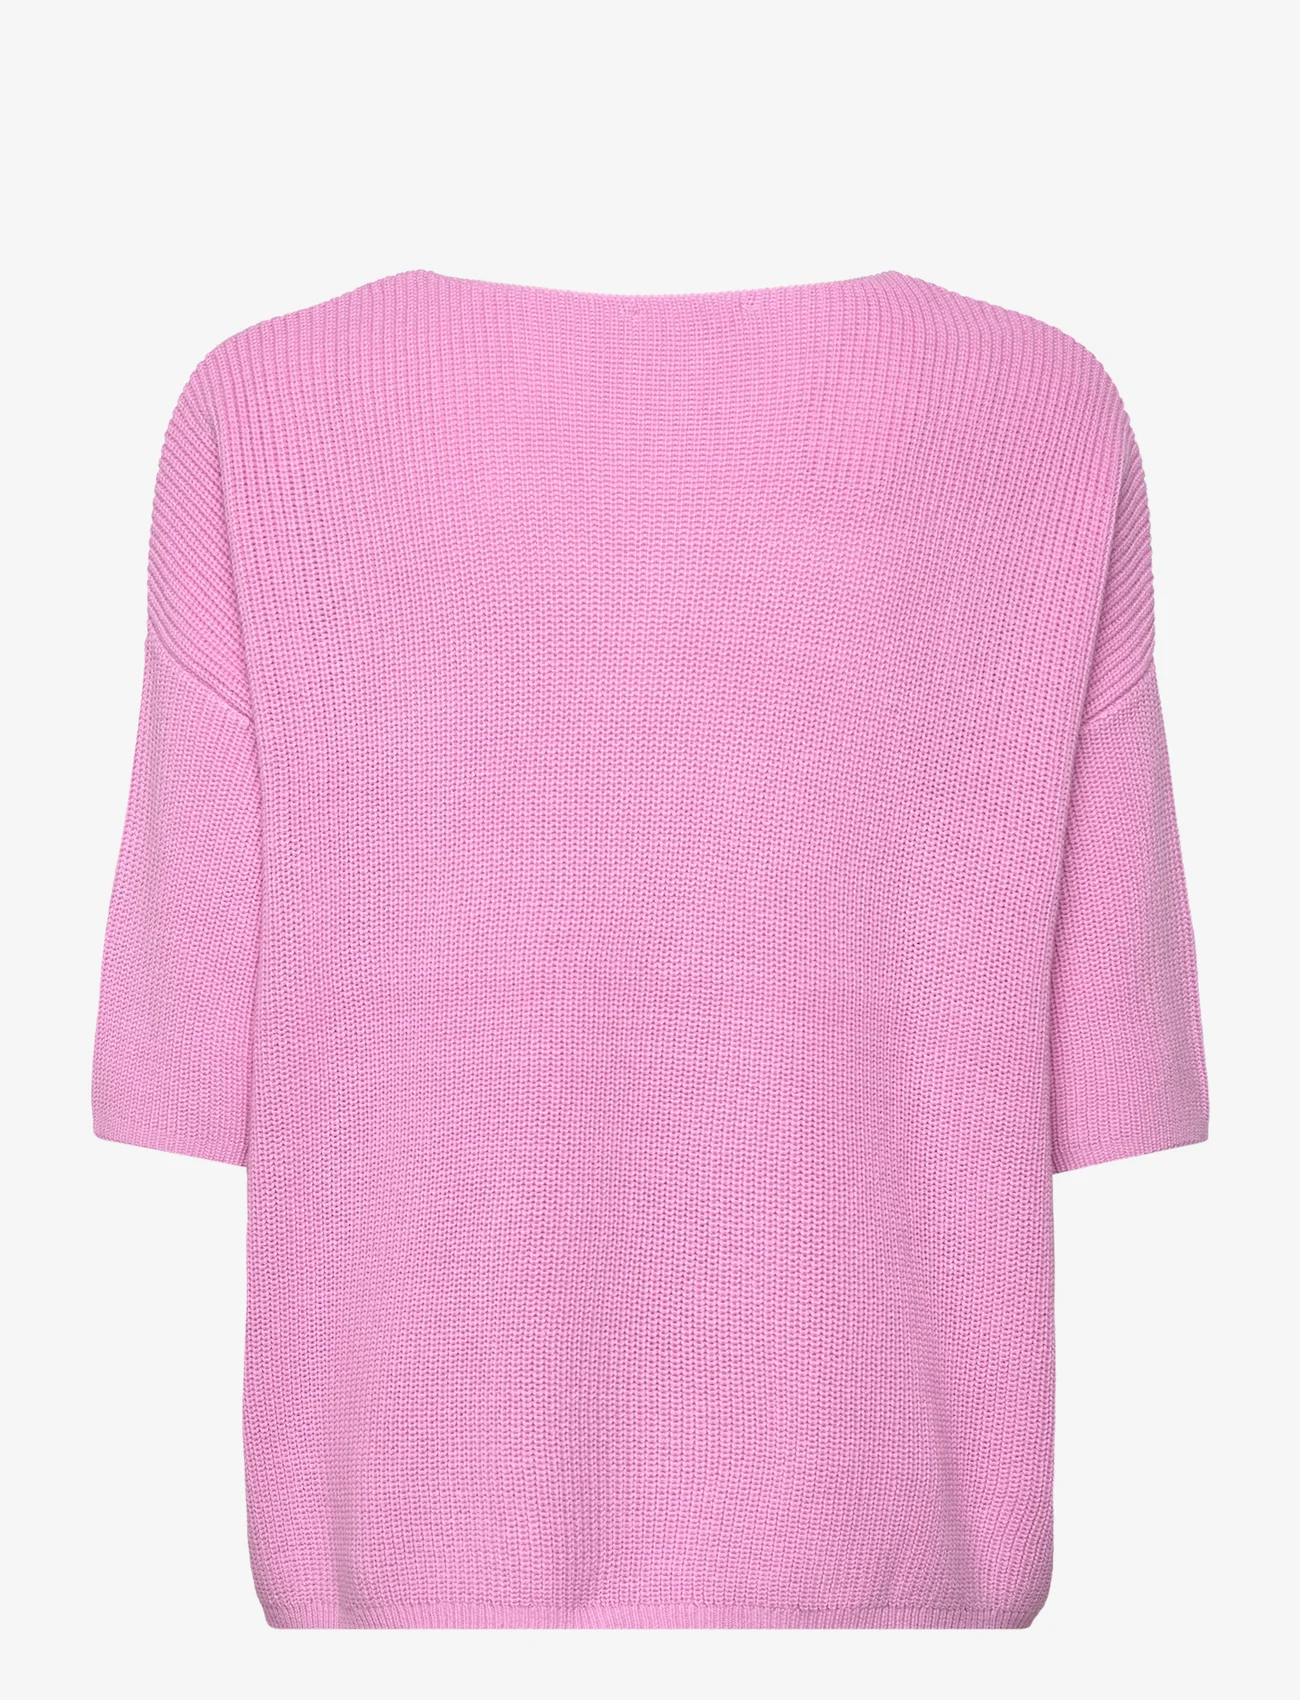 Soaked in Luxury - SLTuesday Cotton Jumper - jumpers - pastel lavender - 1